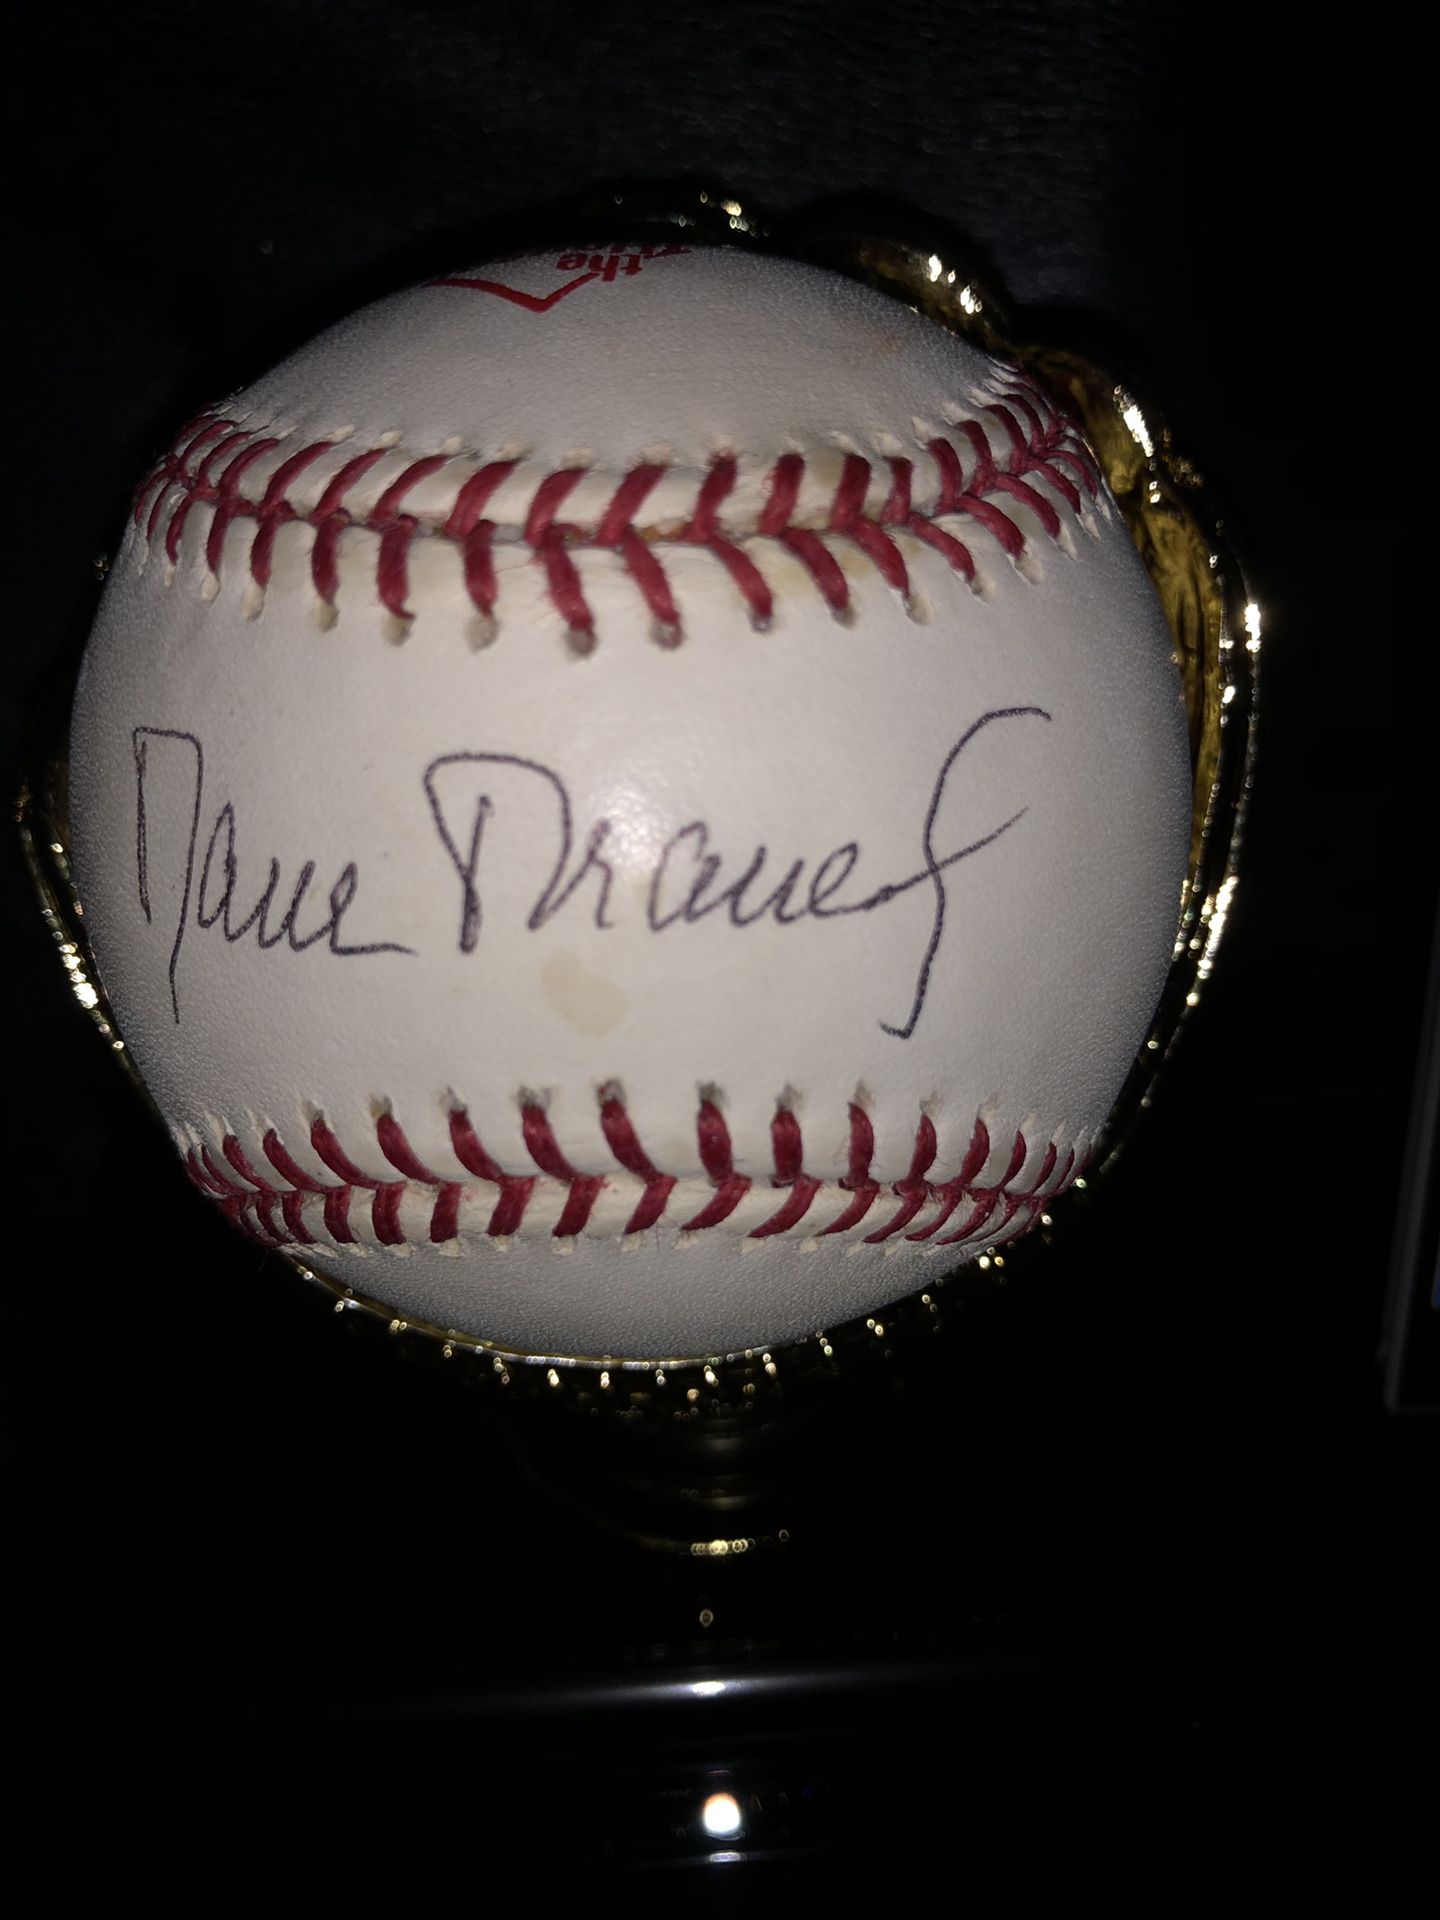 Autographed Baseball by Dave Dravecky, SF Giants in Gold Glove Deluxe Ball & Card Holder Display Case! Beautiful Piece of the Giants Pitcher!